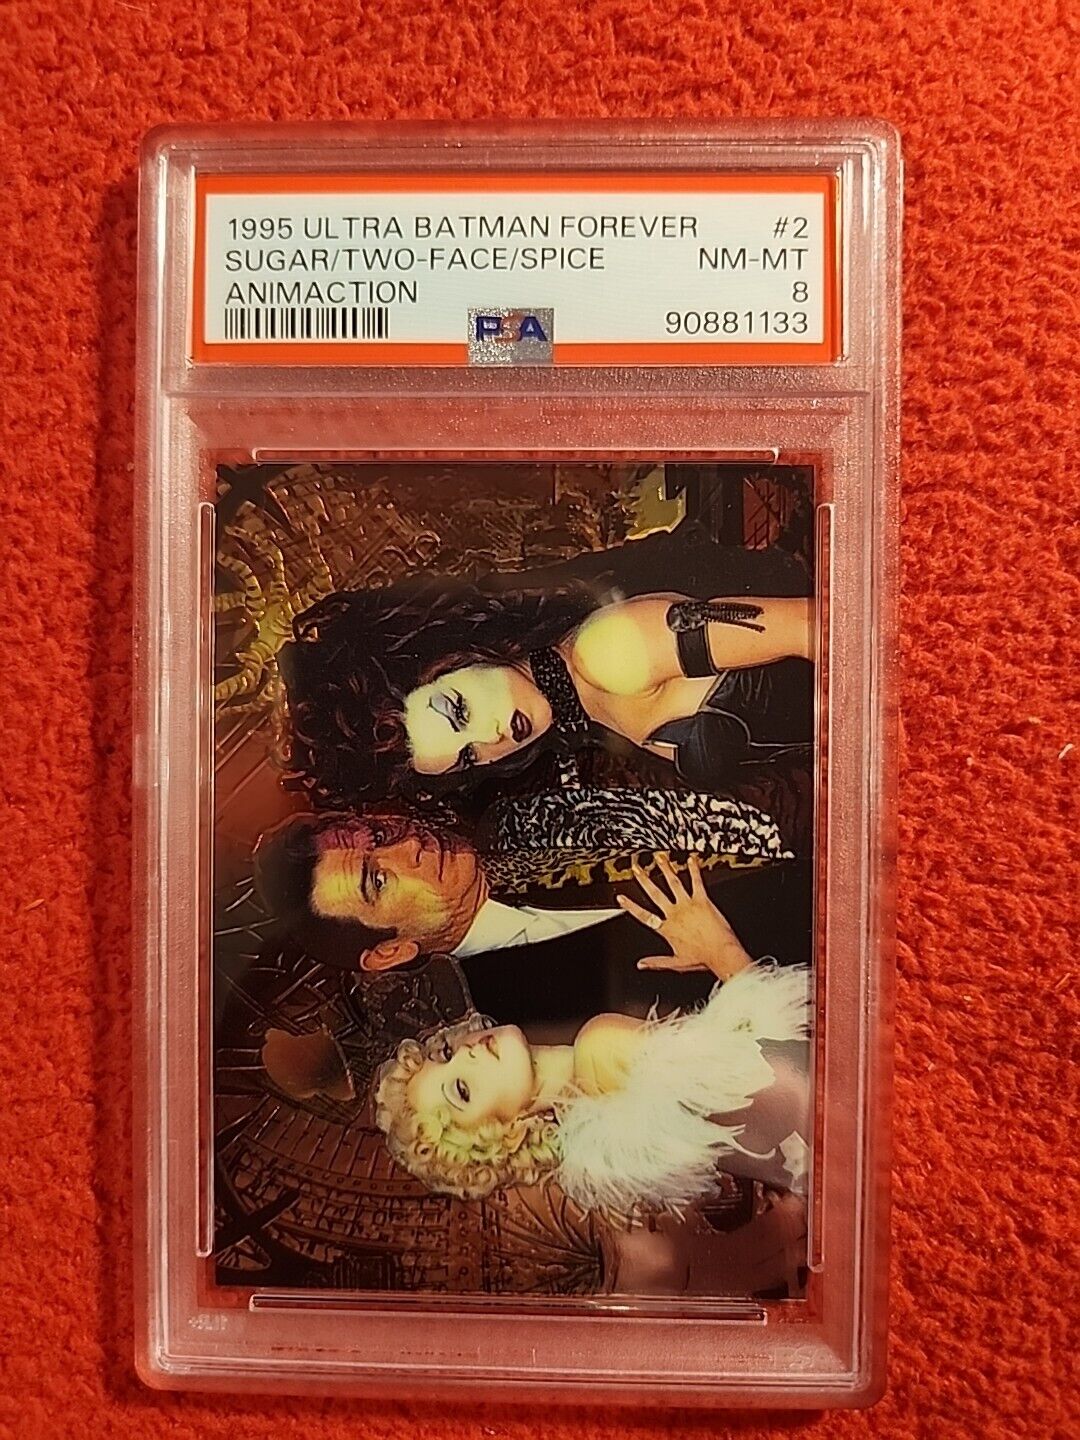 1995 Ultra Batman Forever Animaction Sugar/Two-Face/Spice #2 PSA 8 POP 5 Only 2^